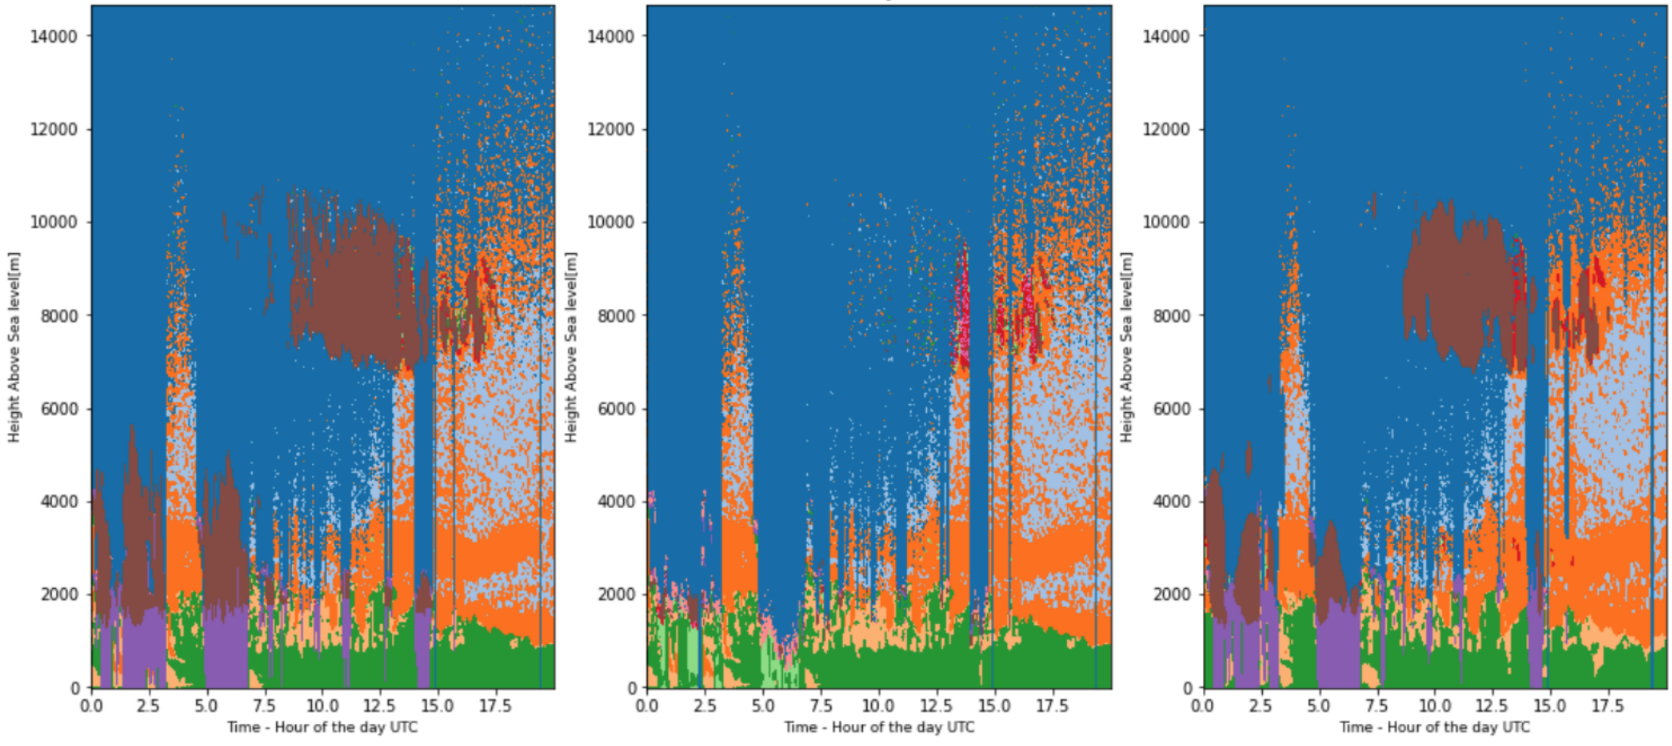 Results from the TROPOS project: a significant improvement in the inference accuracy.  Left panel: actual atmospheric status as obtained from the more expensive measurements (Lidar + Radar)  Middle panel: predicted status as inferred from Lidar measurements using physical models.   Right panel: status determined by the deep learning model developed in the project.